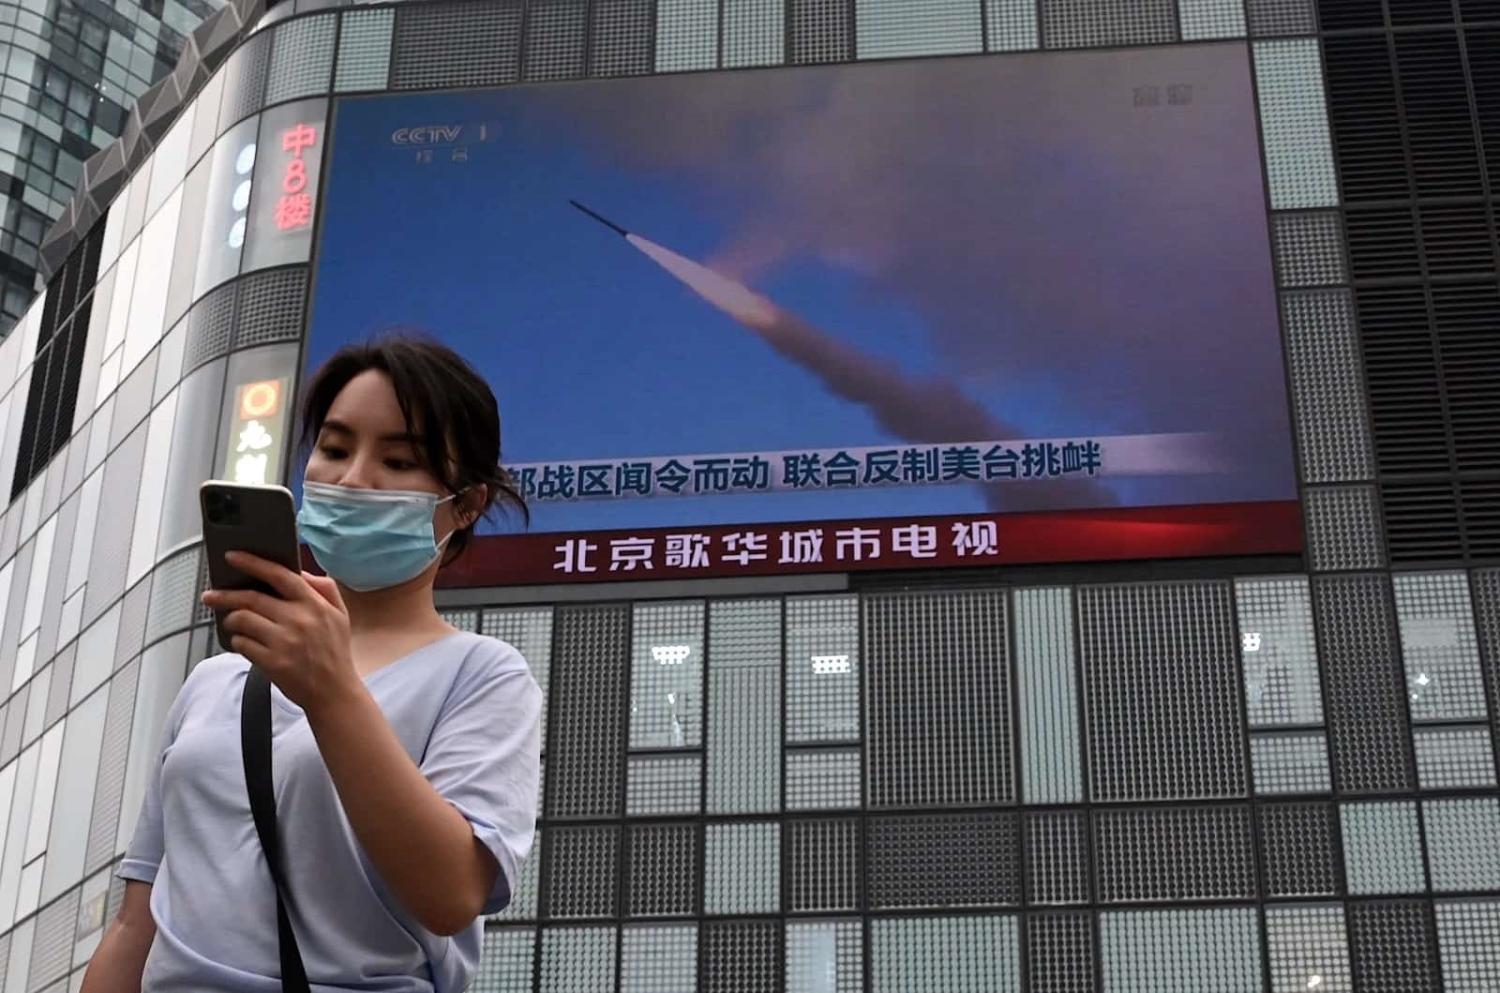 A news broadcast in Beijing about China's military exercises encircling Taiwan, 4 August 2022 (Noel Celis/AFP via Getty Images)